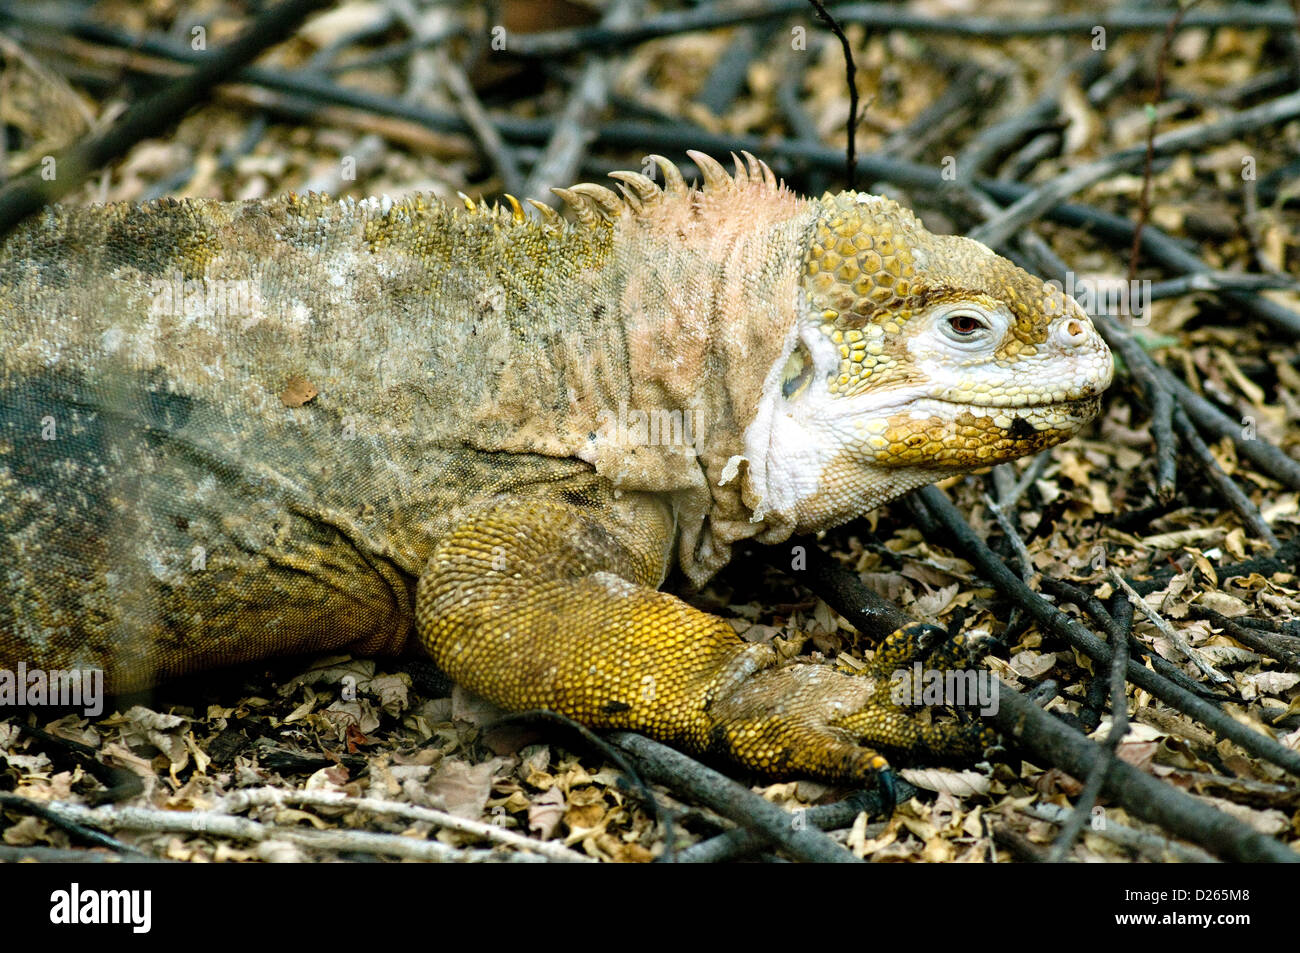 A nesting Galapagos land iguana, monster lizard endemic to the fantastical islands, appears to be sloughing its scaly skin Stock Photo